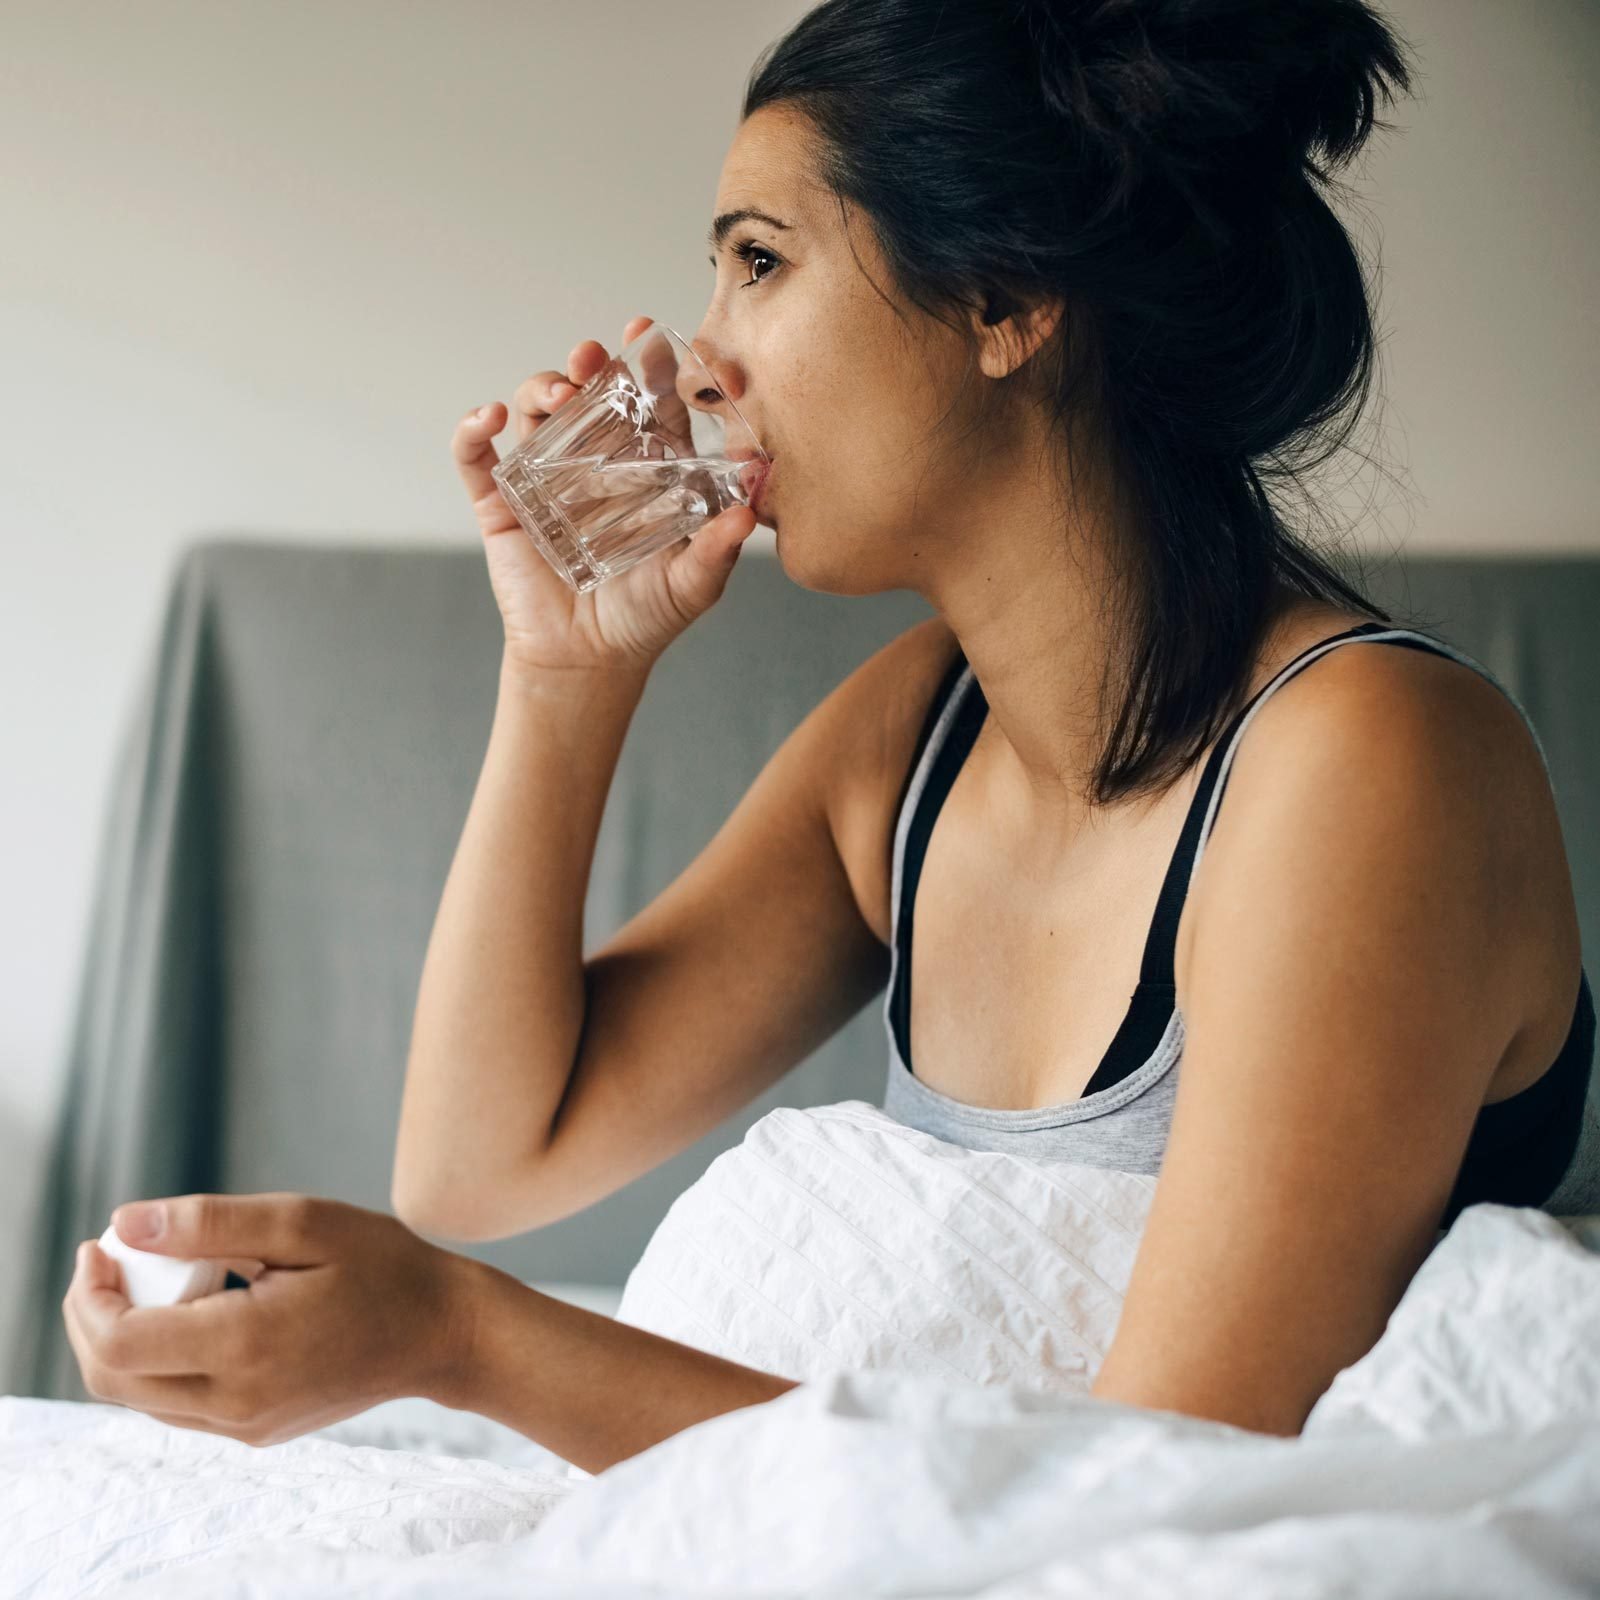 Here’s How Much Water You Lose When You Sleep, According to an Expert